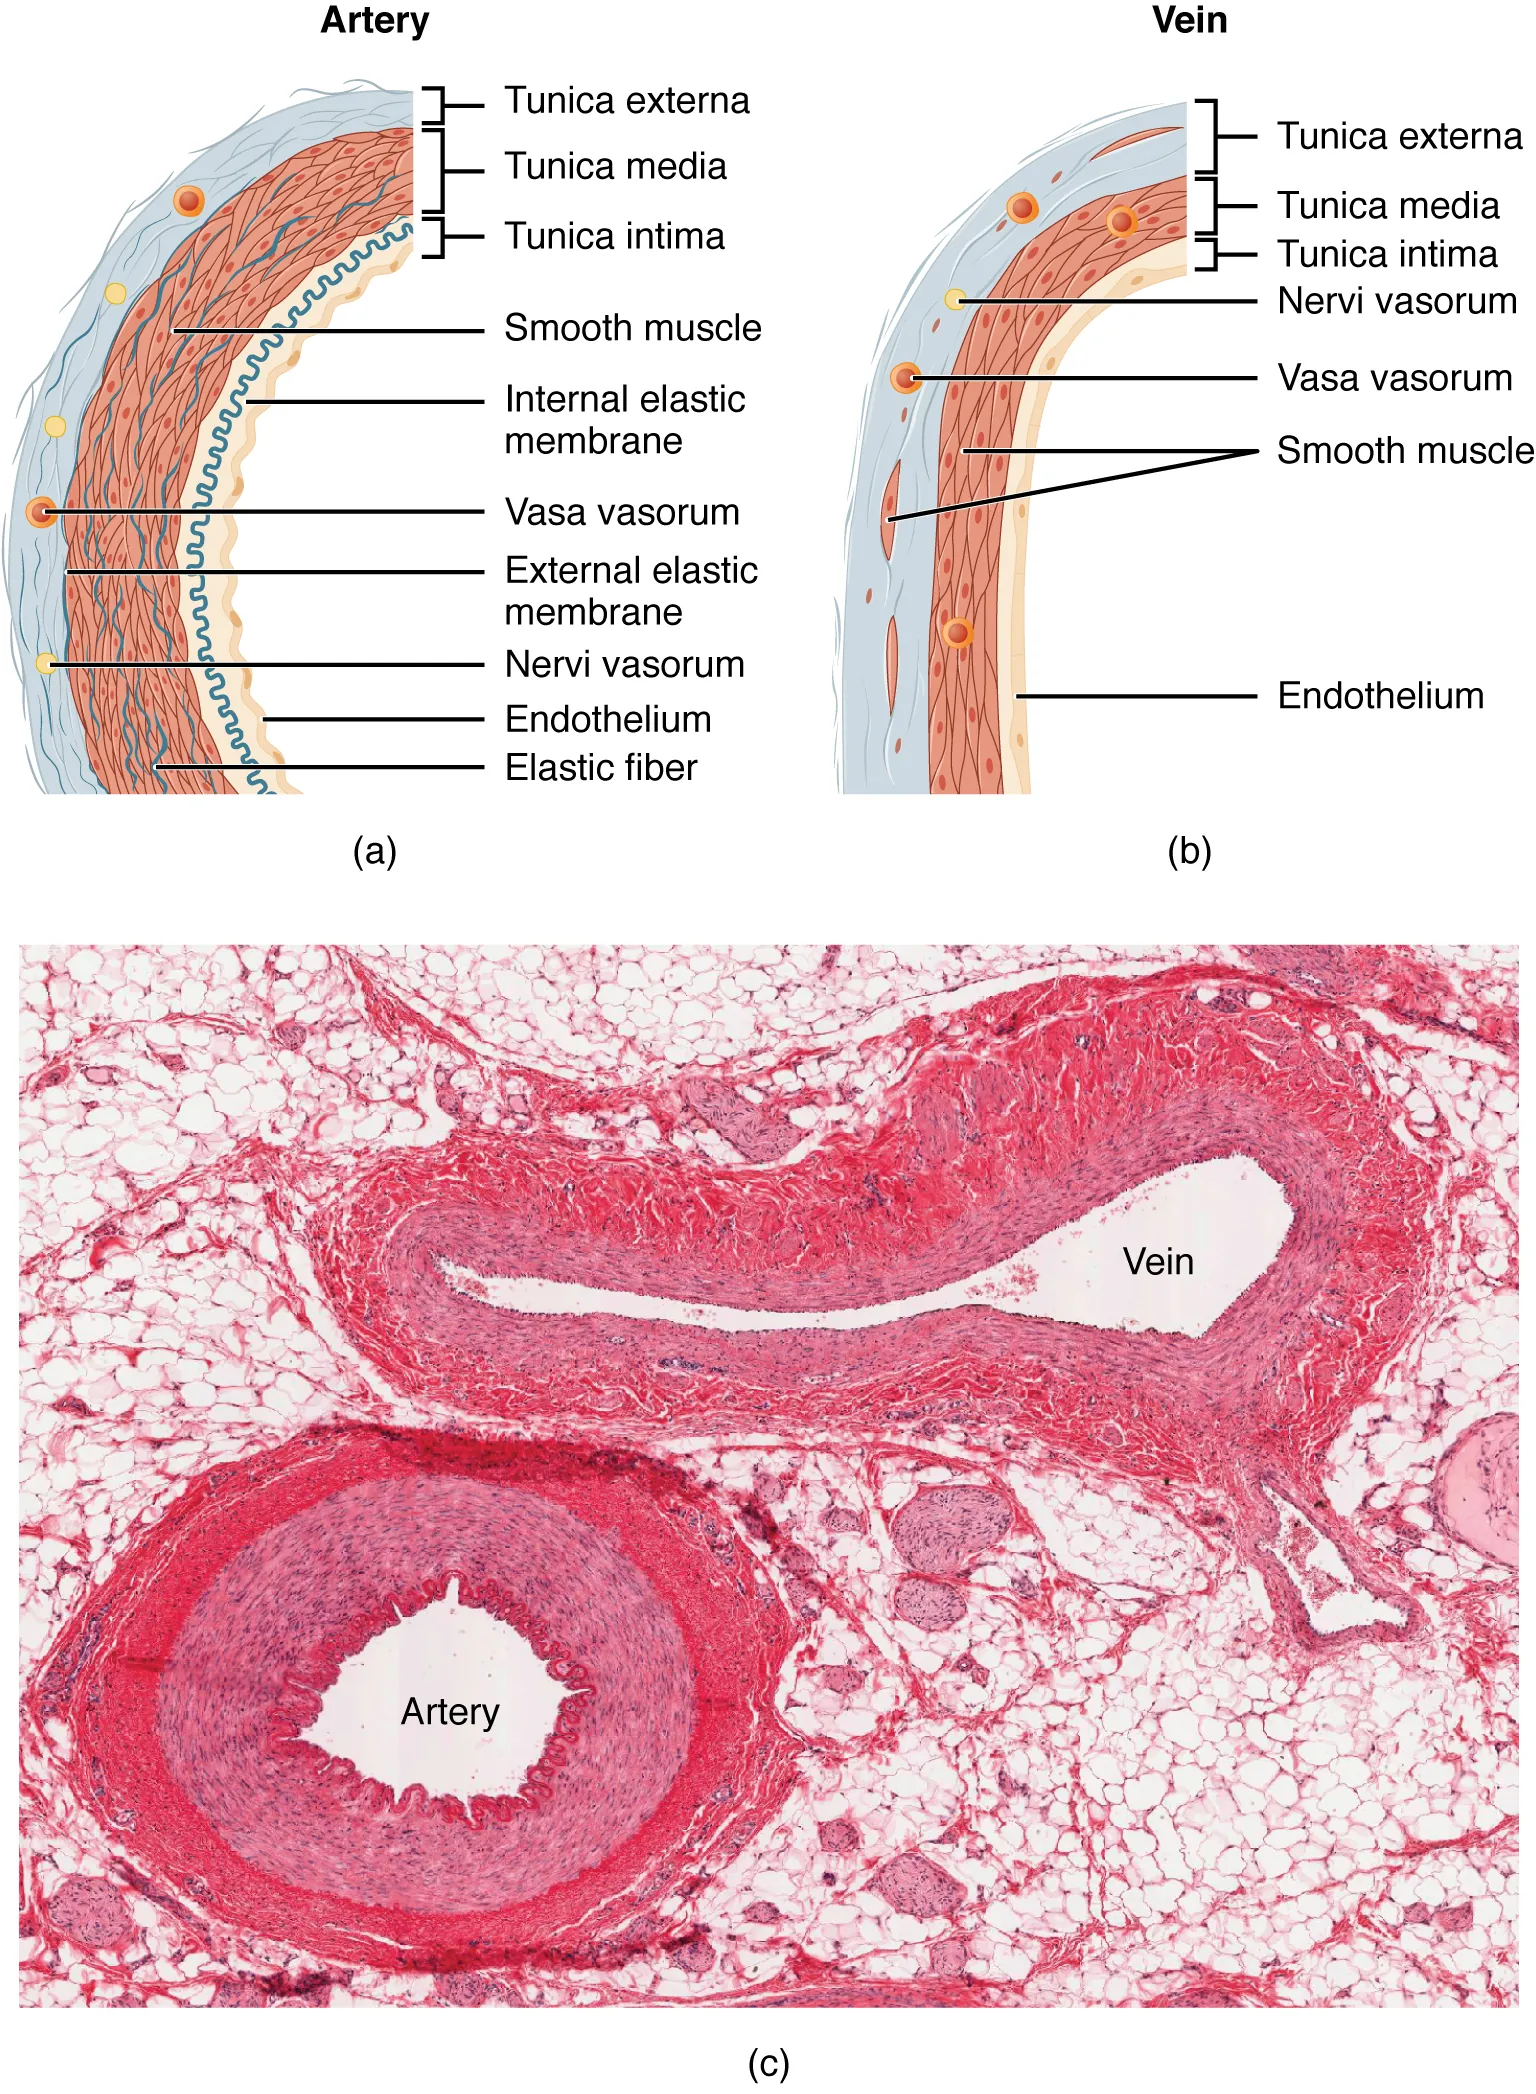 The top left panel of this figure shows the ultrastructure of an artery, and the top right panel shows the ultrastructure of a vein. The bottom panel shows a micrograph with the cross sections of an artery and a vein.